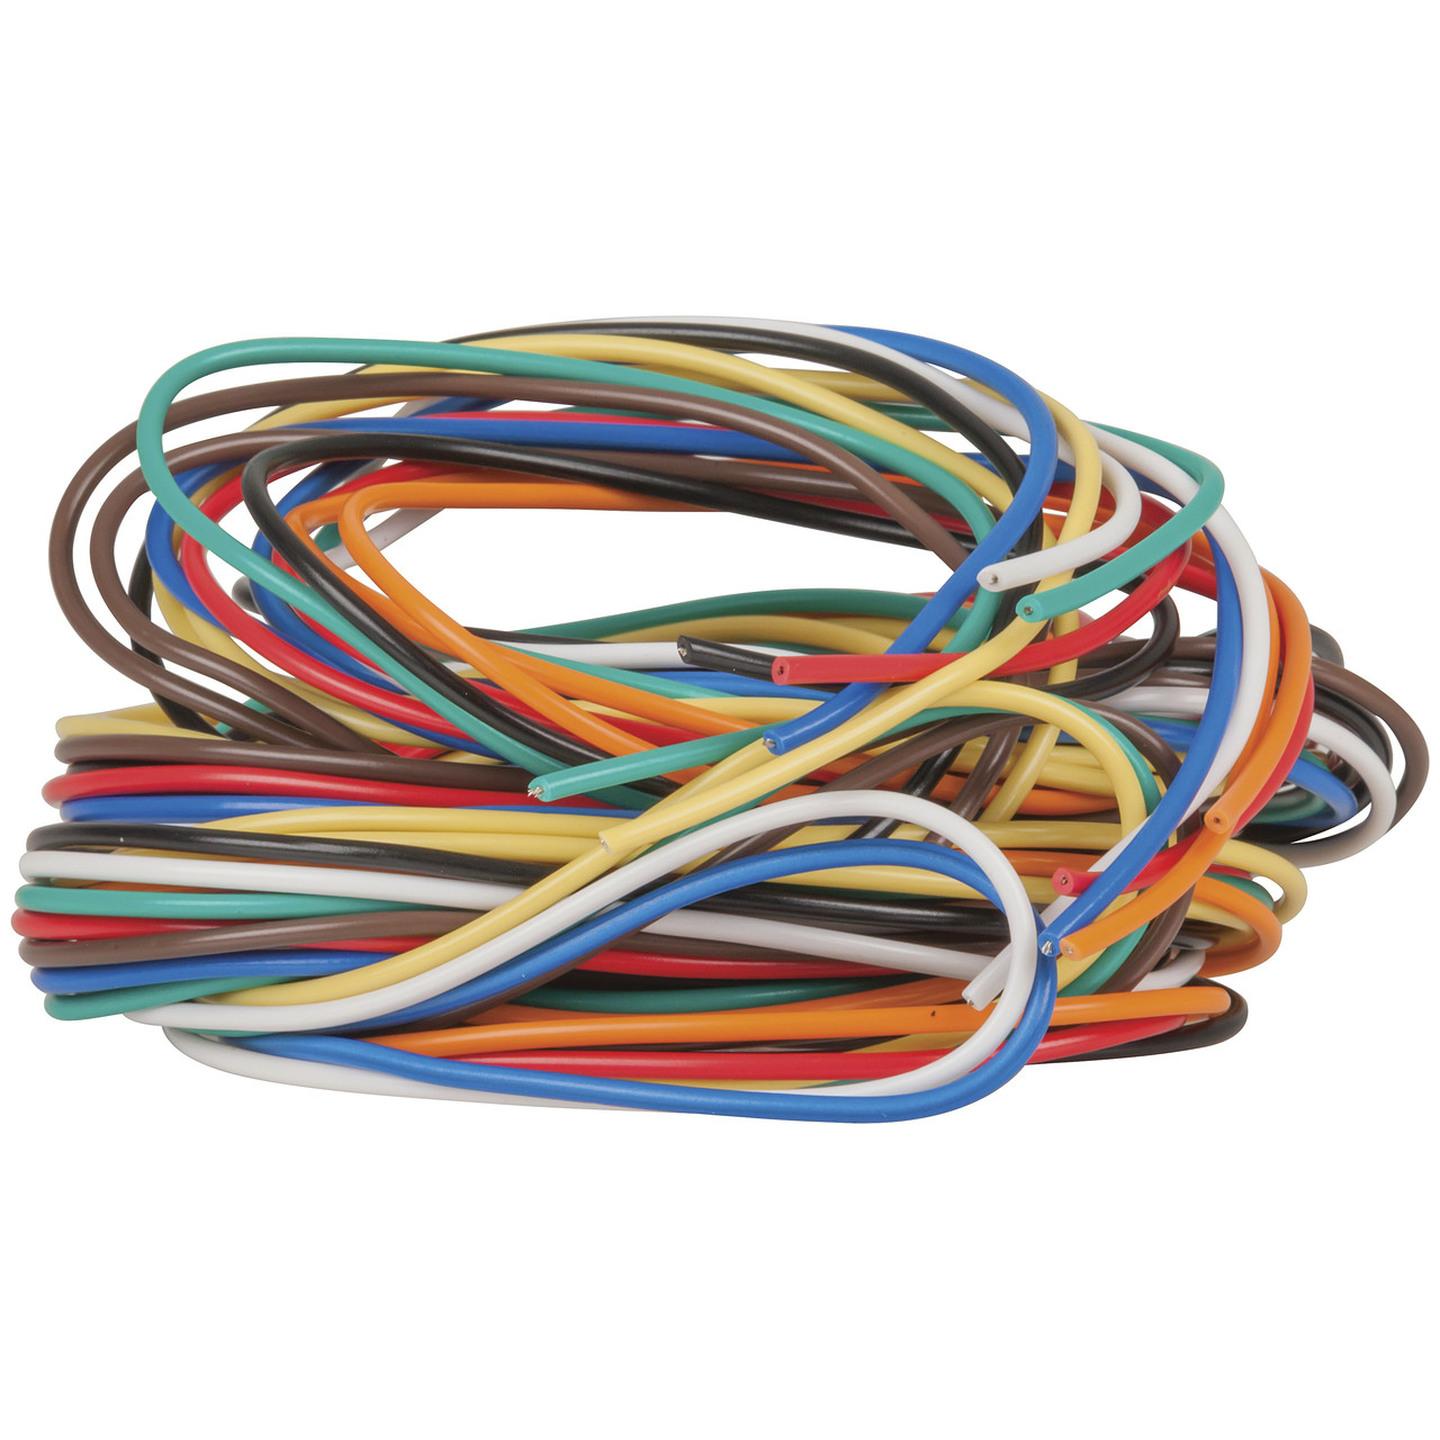 Hook-Up Wire Pack - 2 metres